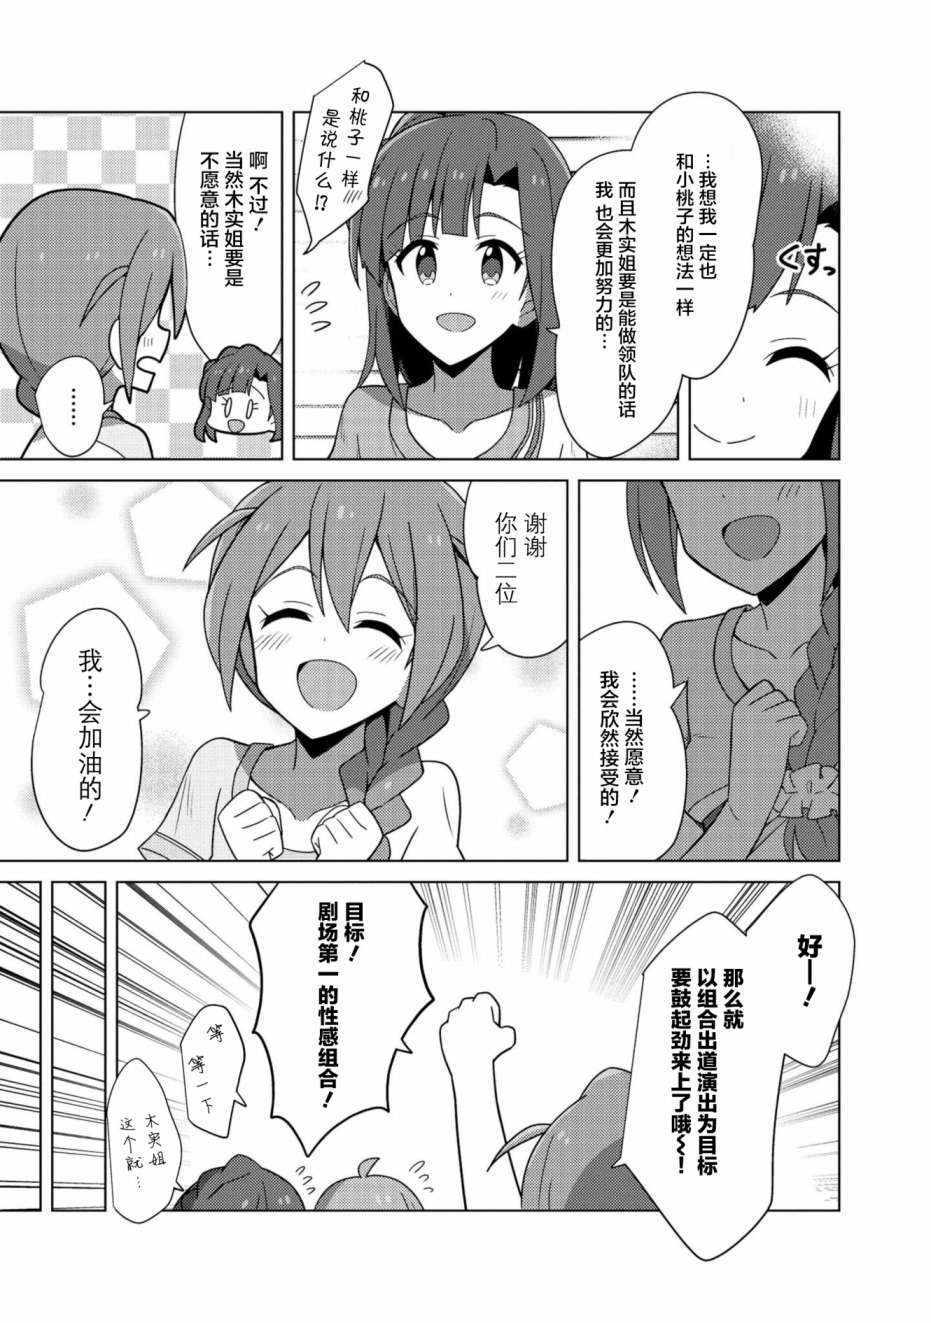 《THE IDOLM@STER MILLION LIVE! Brand New Song》漫画 Brand New Song 02卷附赠